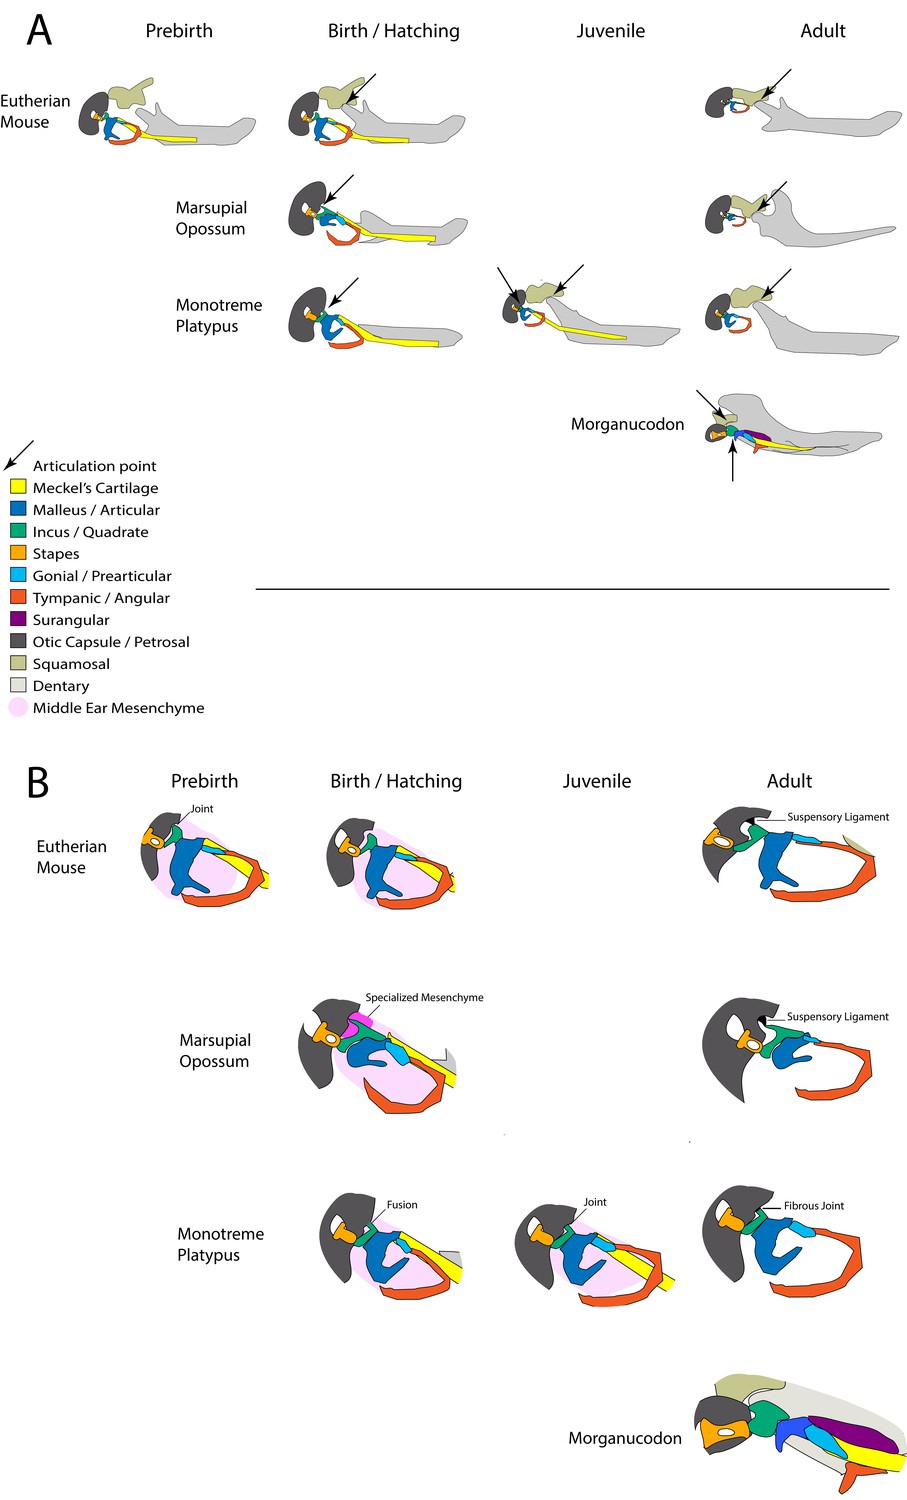 Transient role of the middle ear as a lower jaw support across 